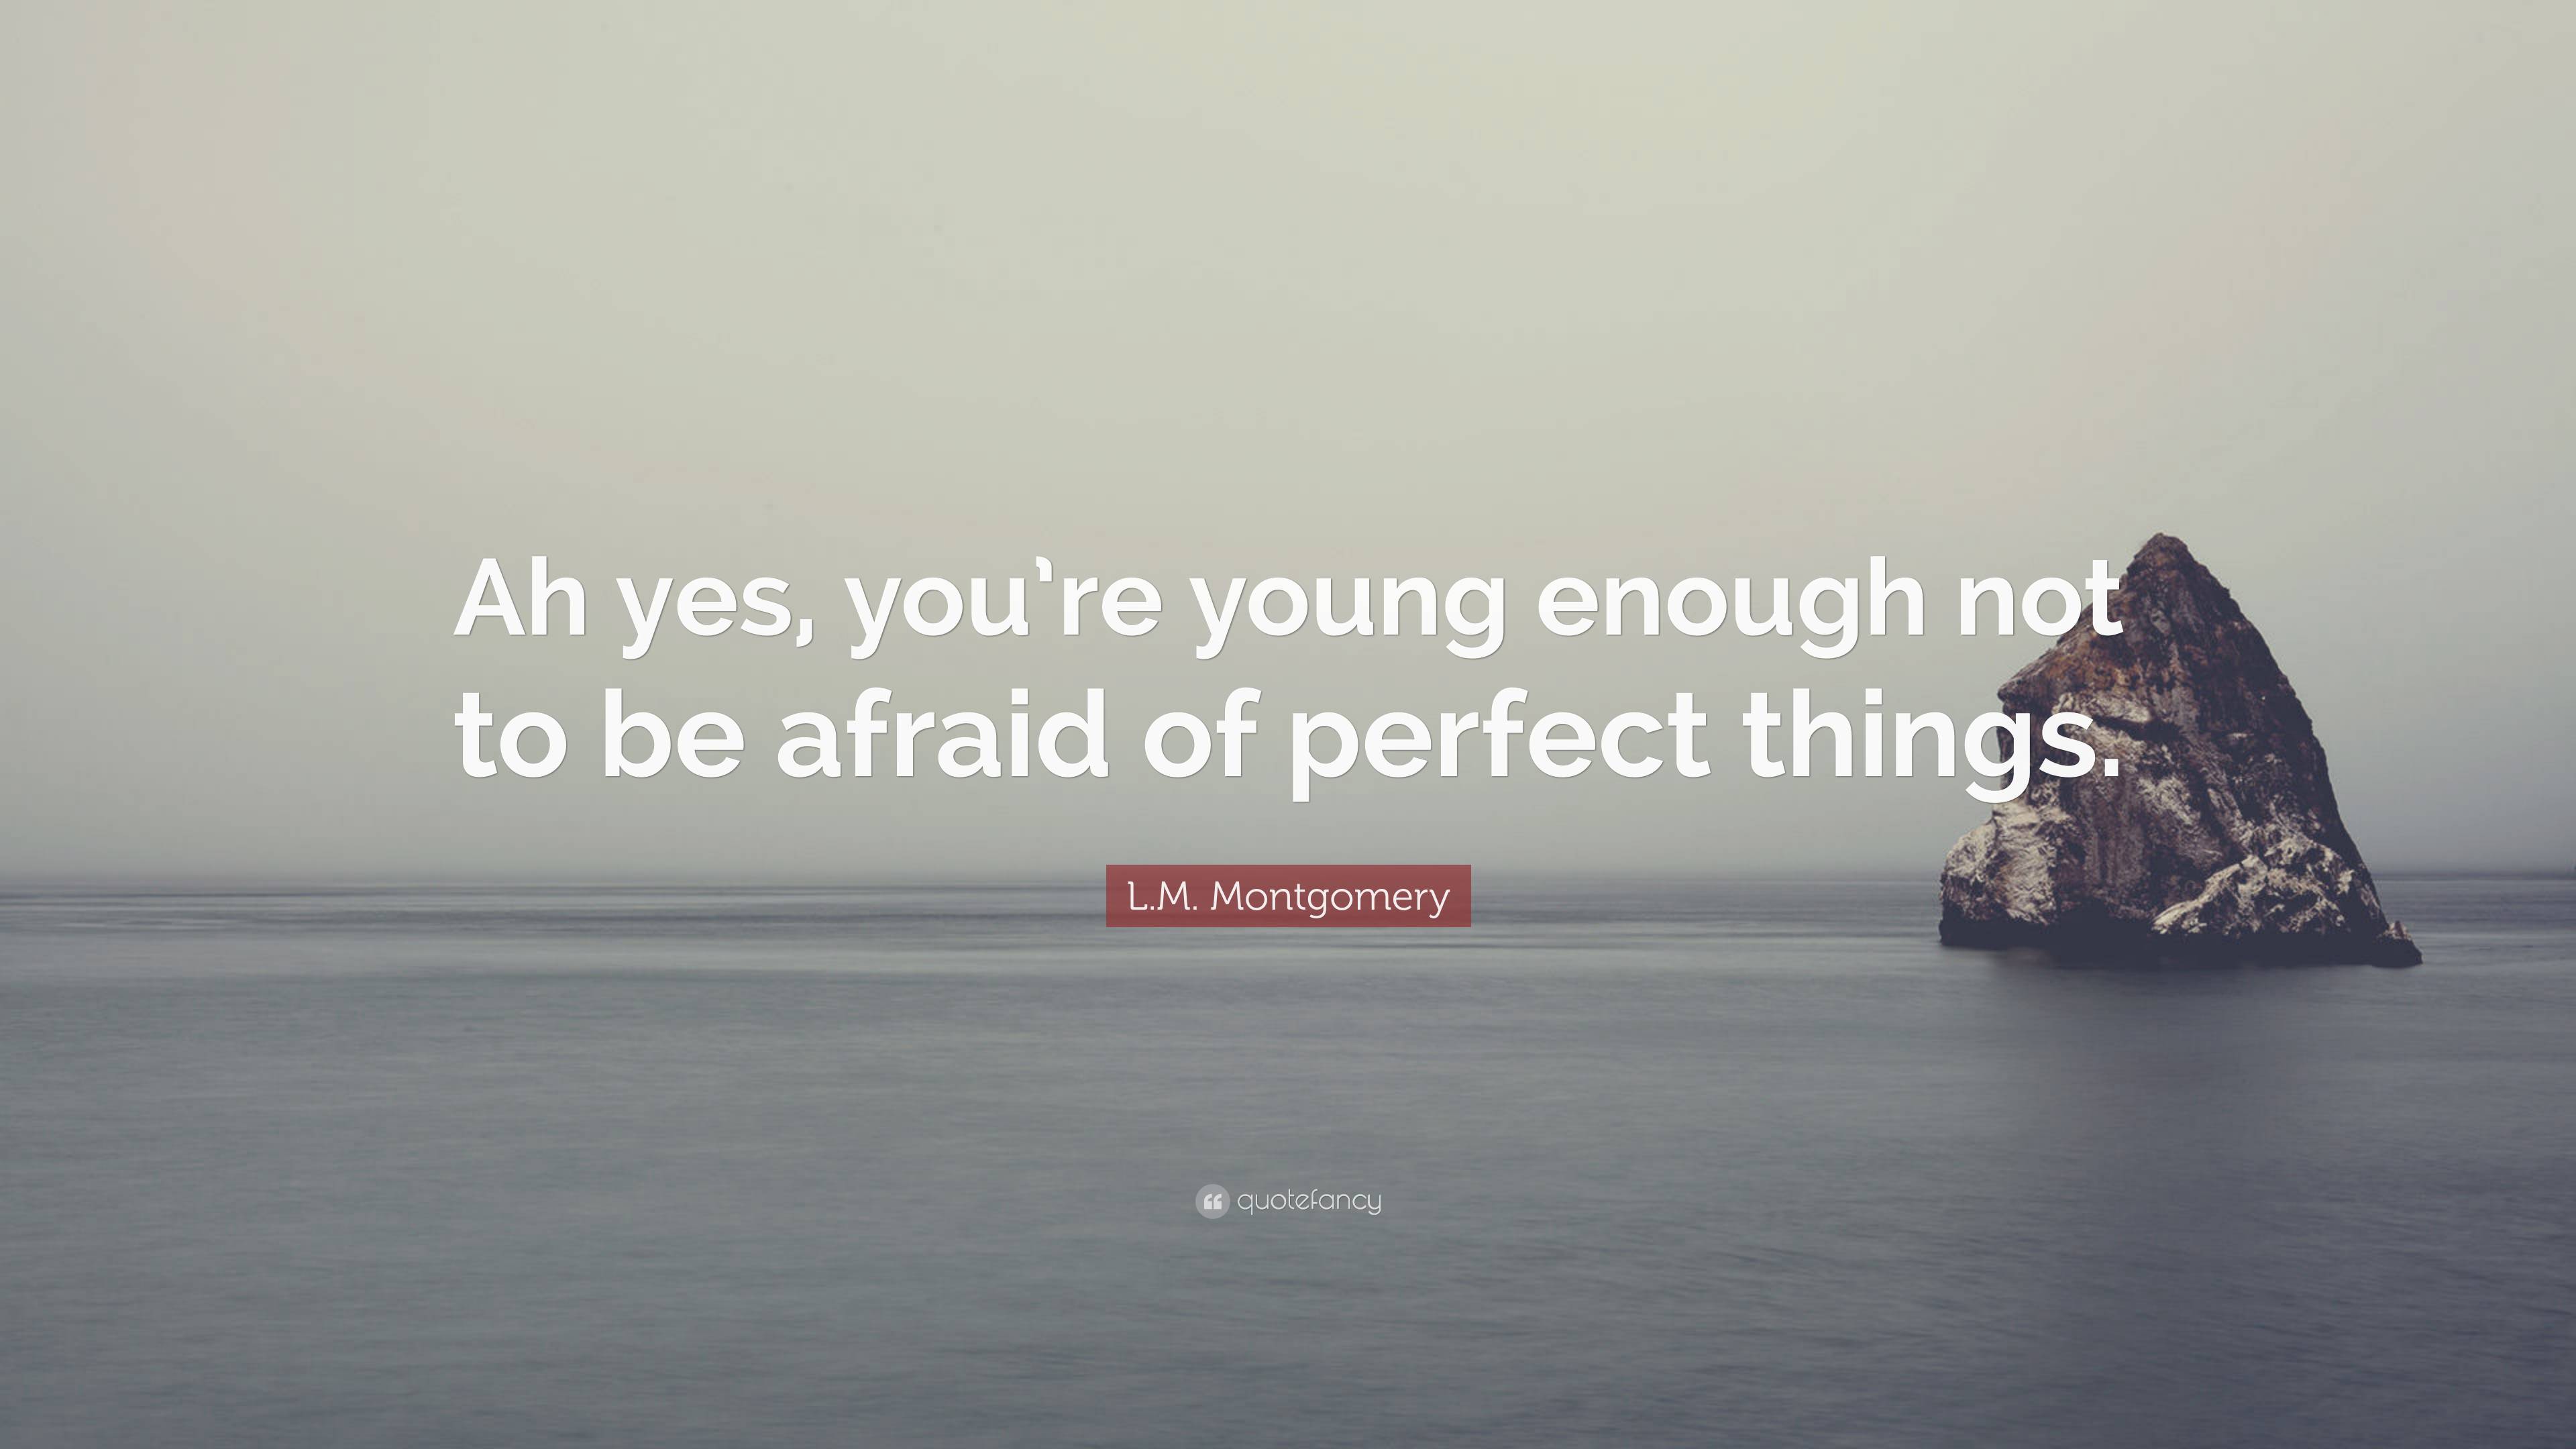 L.M. Montgomery Quote: “Ah yes, you’re young enough not to be afraid of ...